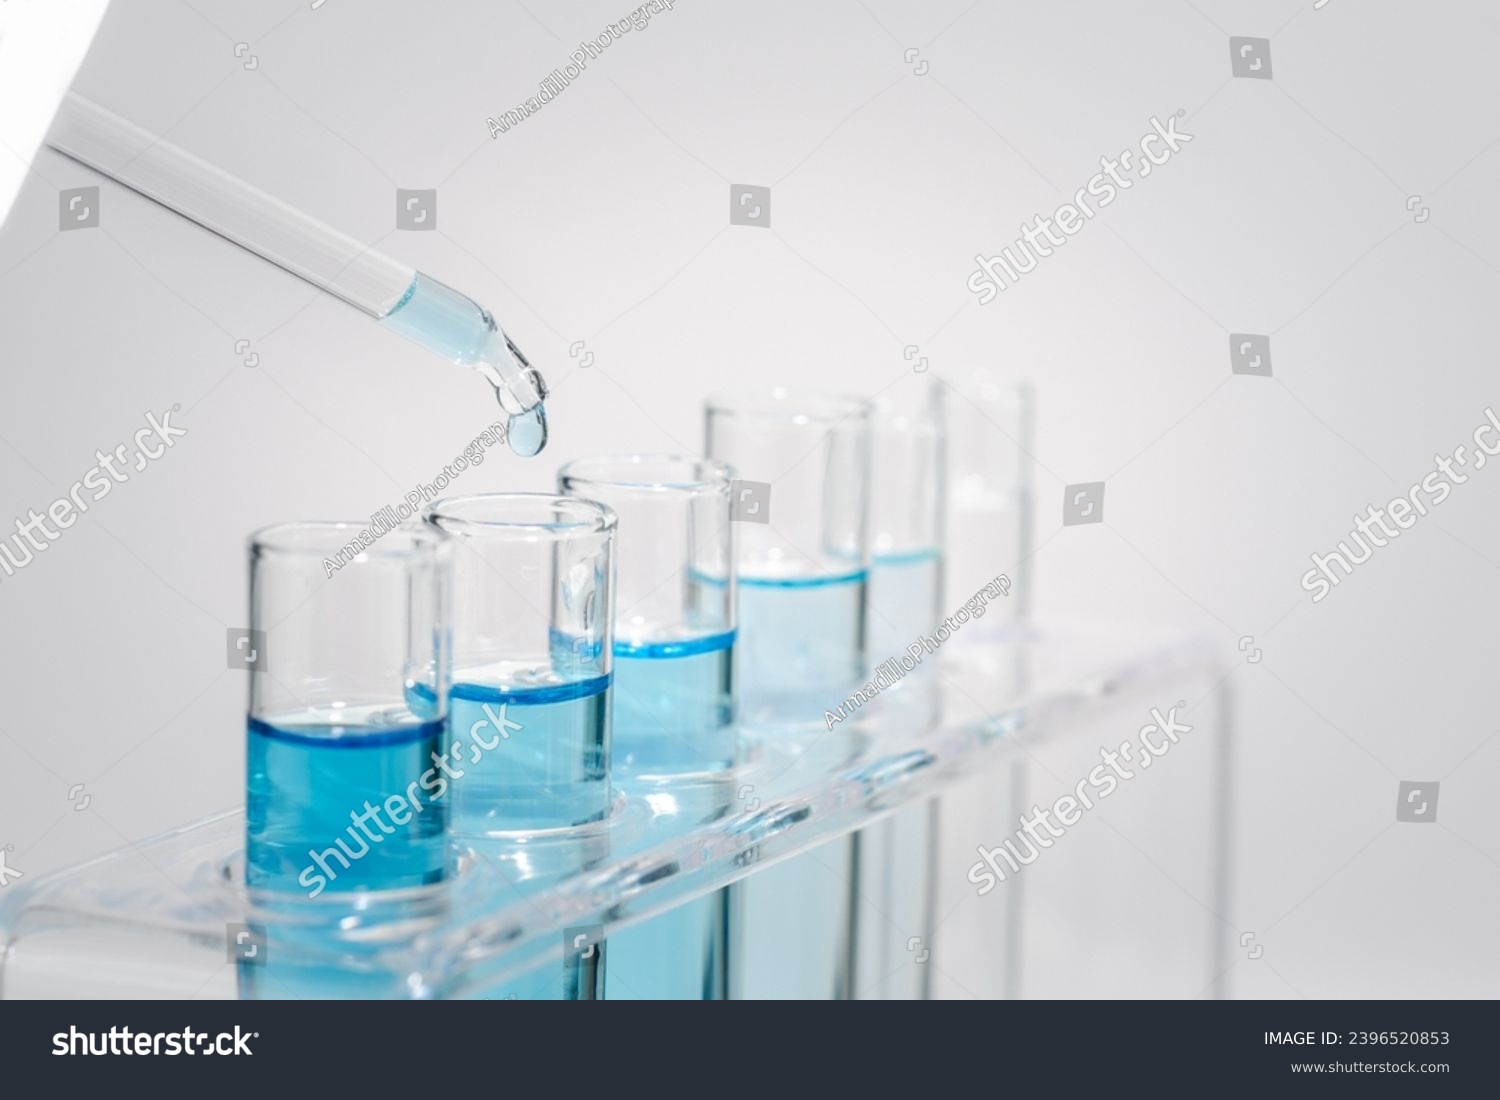 Chemistry laboratory tube glass, science laboratory research and development concept, flask, beaker, and test tubes with dropping blue liquid water sample test, scientific test tubes equipment. #2396520853